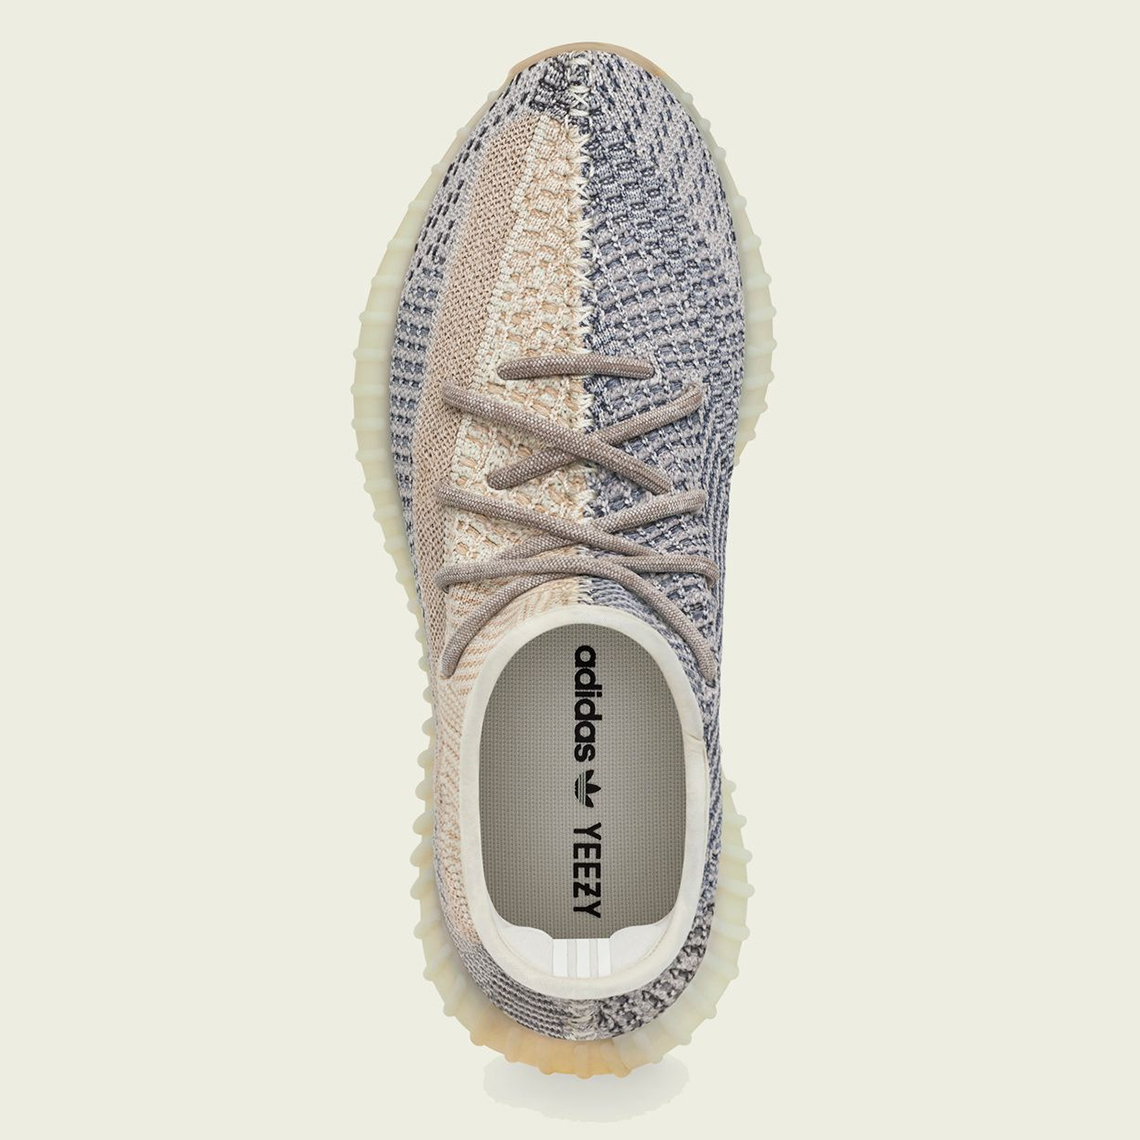 adidas Yeezy school boost 350 v2 ash blue GY7658 official images 4